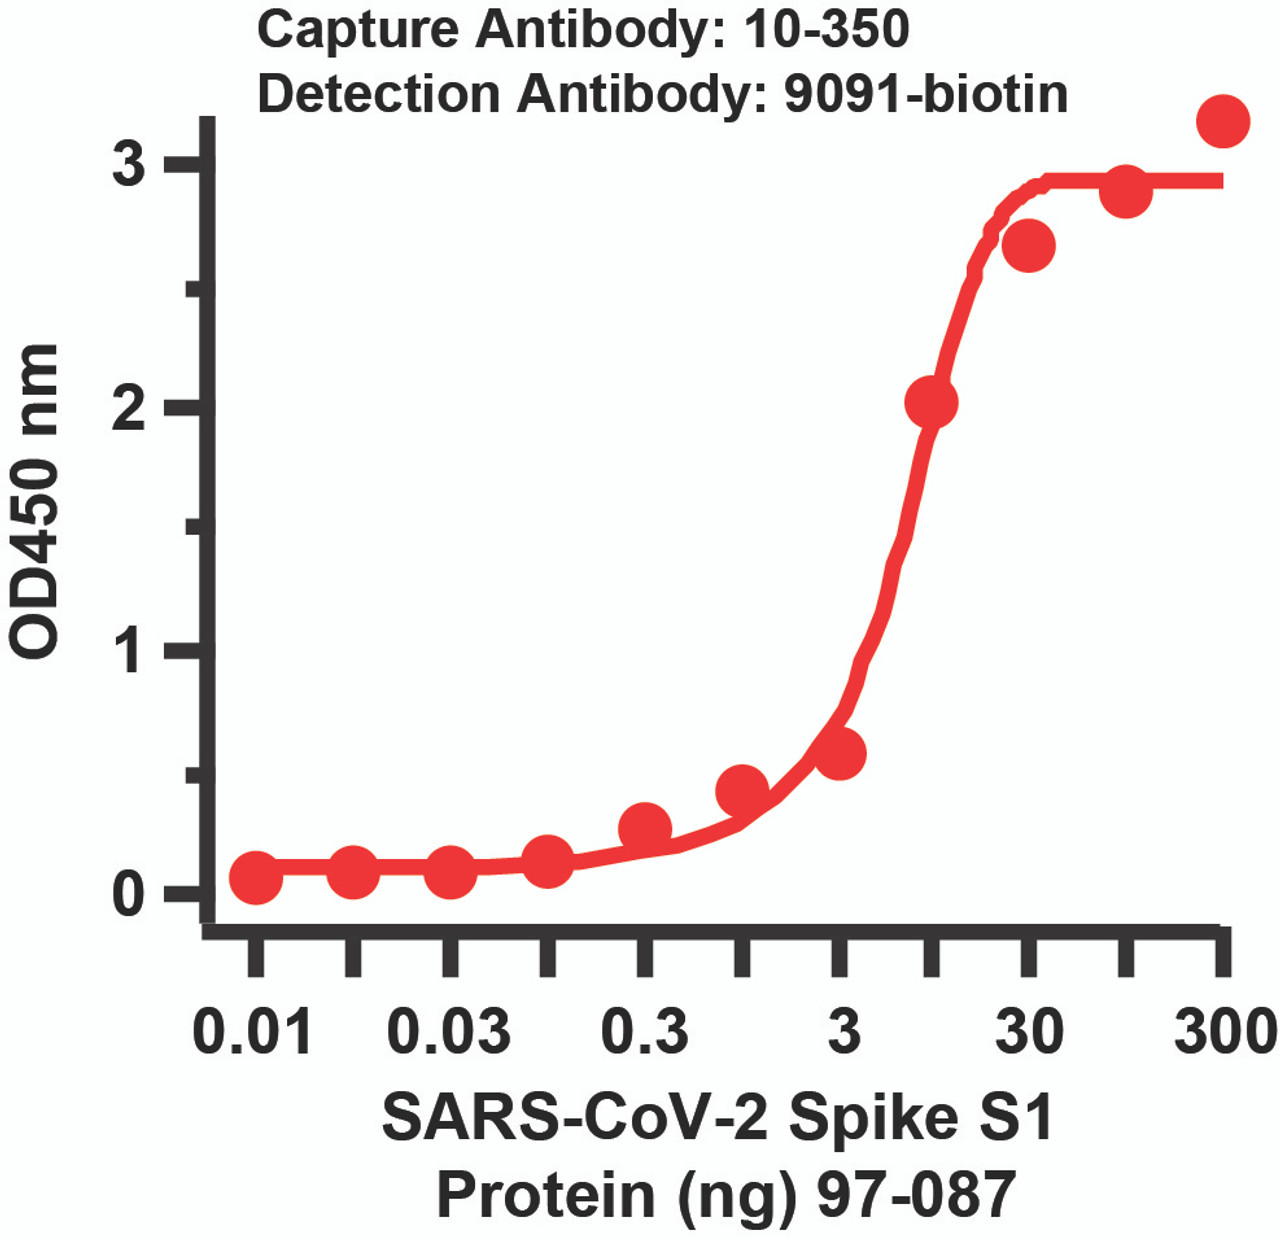 Sandwich ELISA for SARS-CoV-2 (COVID-19) Matched Pair Spike S1 Antibodies
Antibodies: SARS-CoV-2 (COVID-19) Spike Antibodies, 10-350 and 9091-biotin. A sandwich ELISA was performed using SARS-CoV-2 Spike S1 antibody (10-350, 2ug/ml) as capture antibody, the Spike S1 recombinant protein as the binding protein (97-087), and the anti-SARS-CoV-2 Spike S1 antibody (9091-biotin, 1ug/ml) as the detection antibody. Secondary: Streptavidin-HRP at 1:10000 dilution. Detection range is from 0.03 ng to 300 ng. EC50 = 7.37 ng